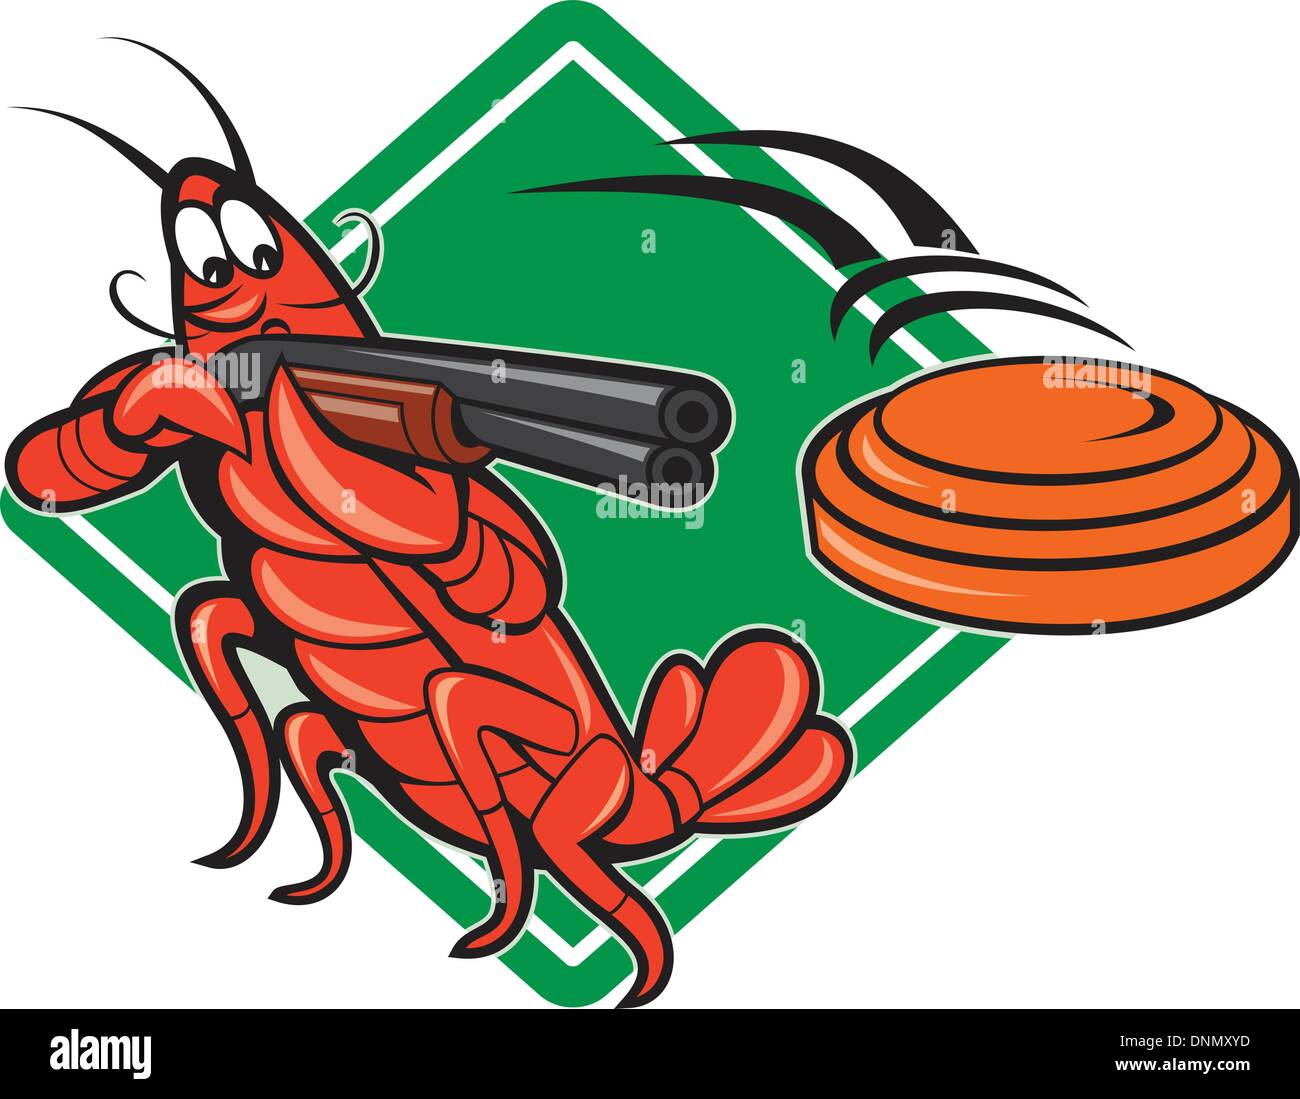 Illustration of a crayfish lobster skeet target shooting using shotgun rifle aiming at flying clay disk with diamond shape in background done in cartoon style. Stock Vector